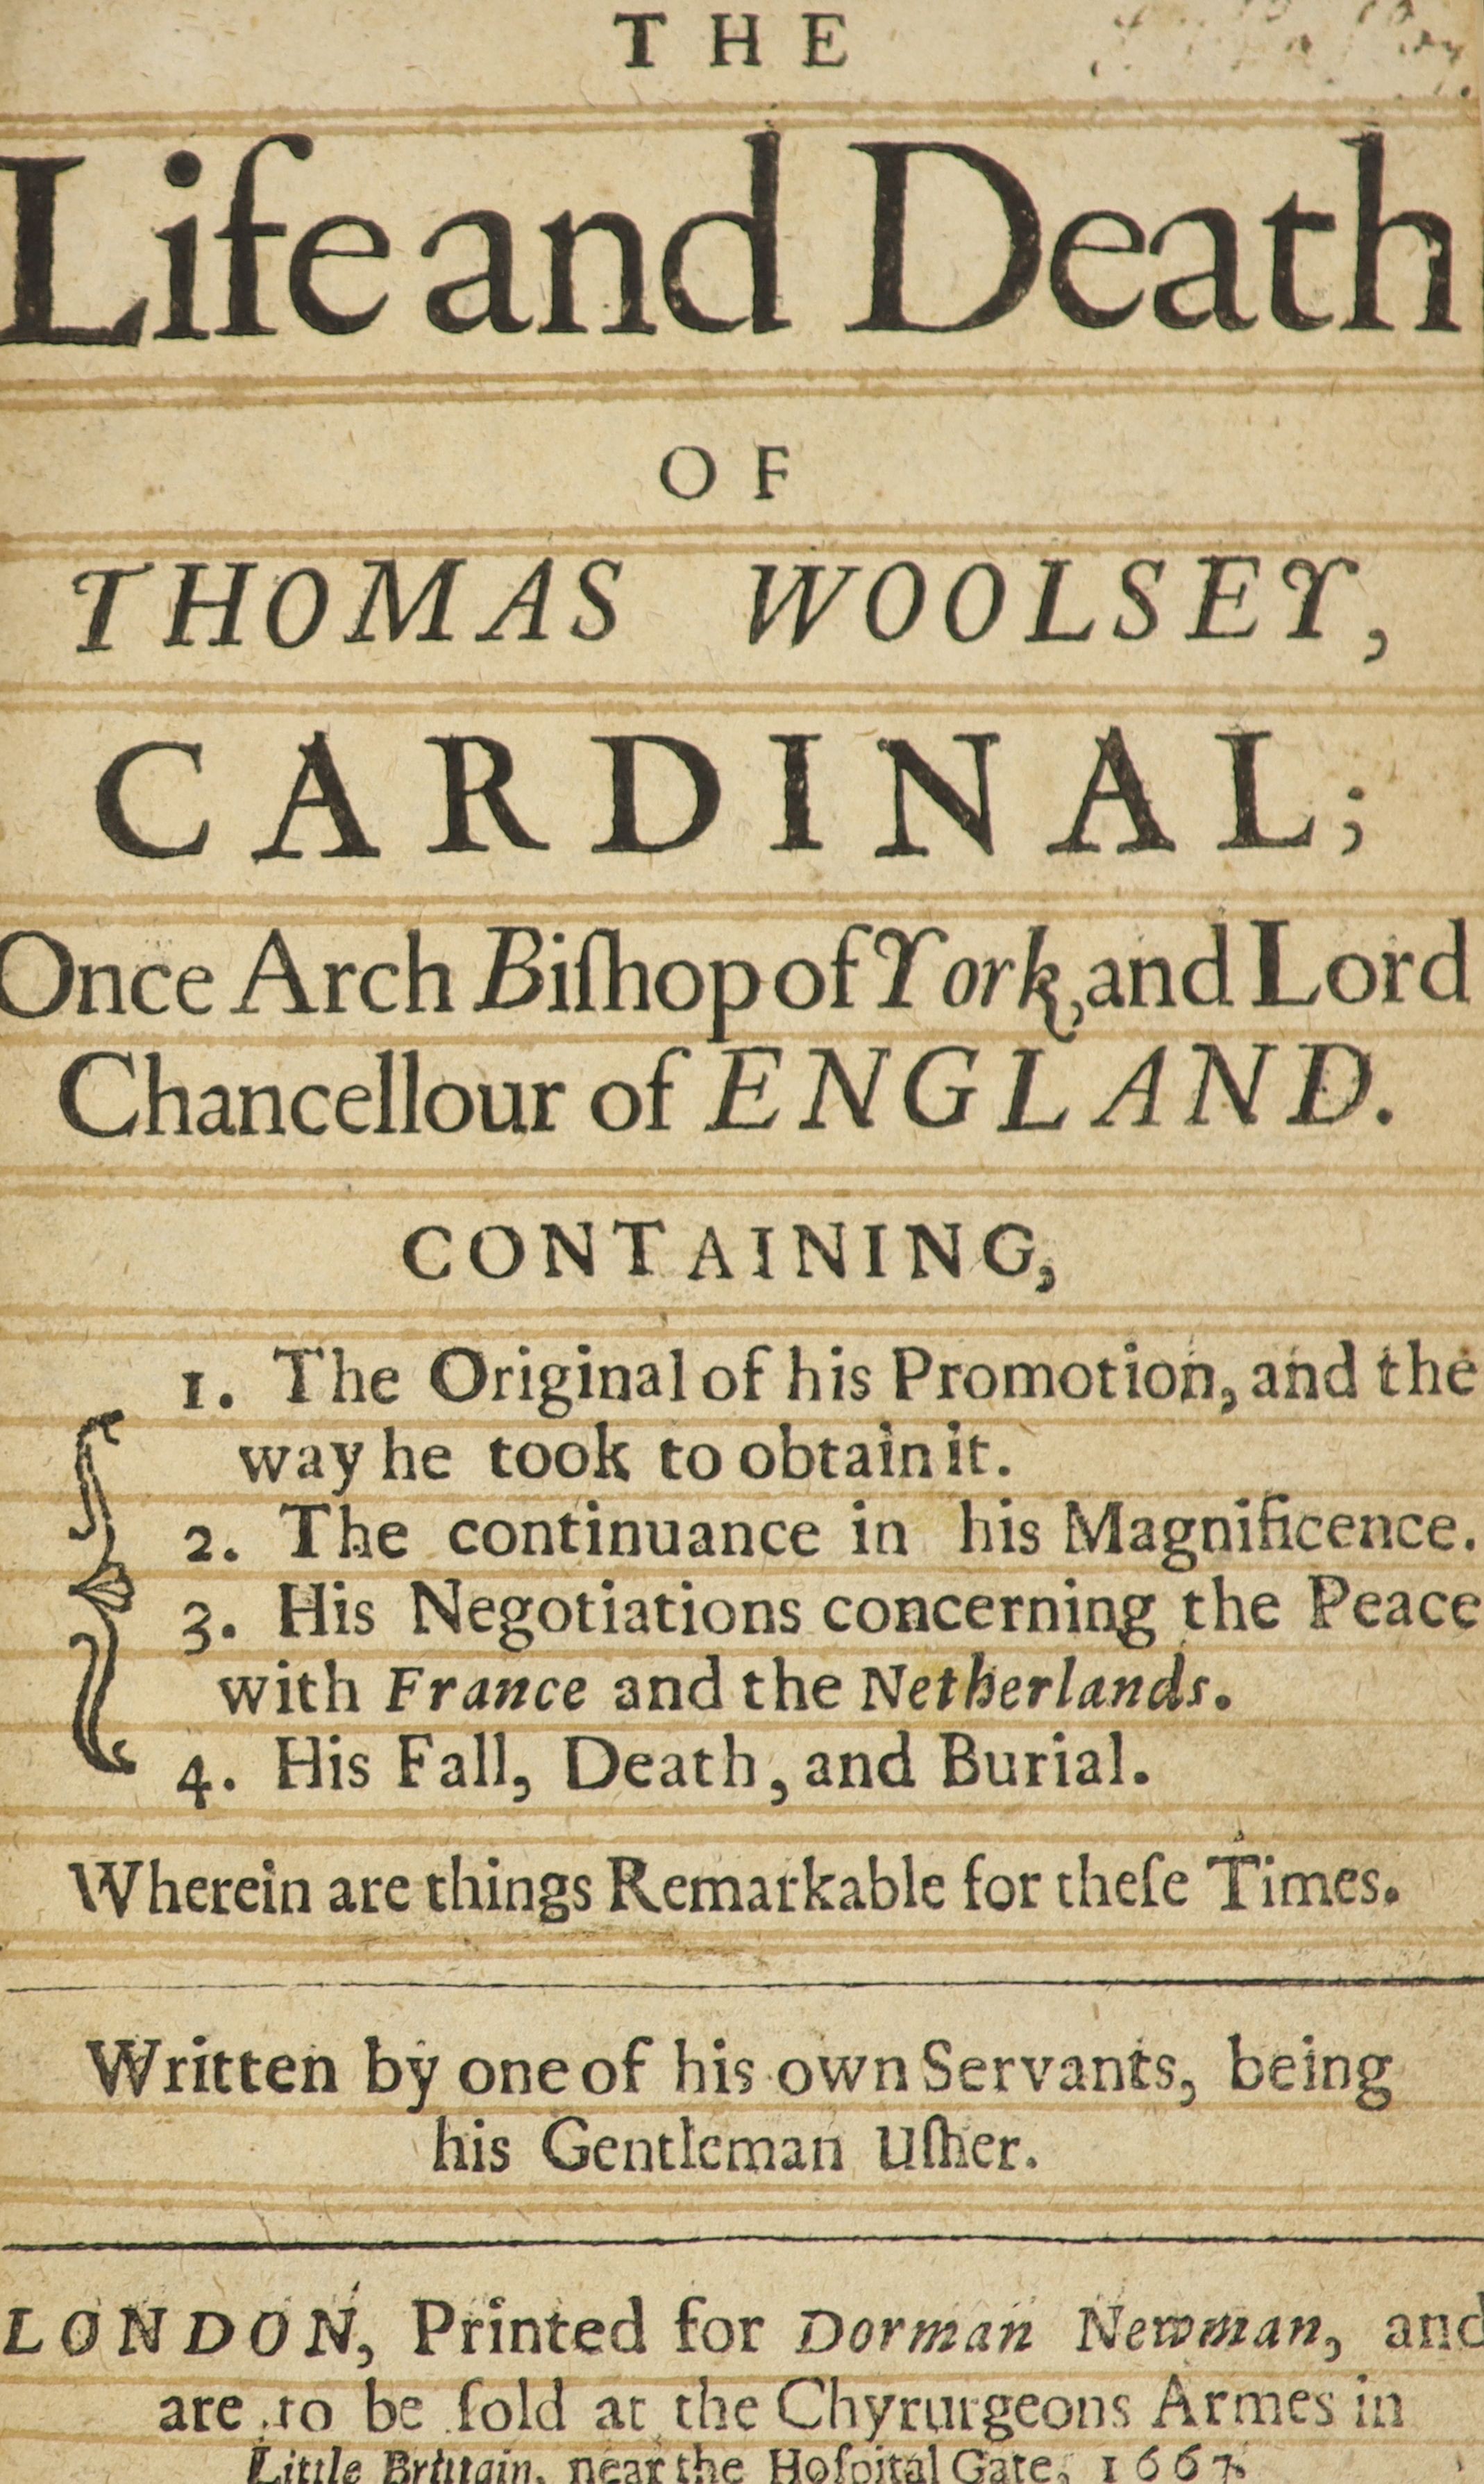 [Cavendish, George] The Life and Death of Thomas Woolsey, Cardinal ...